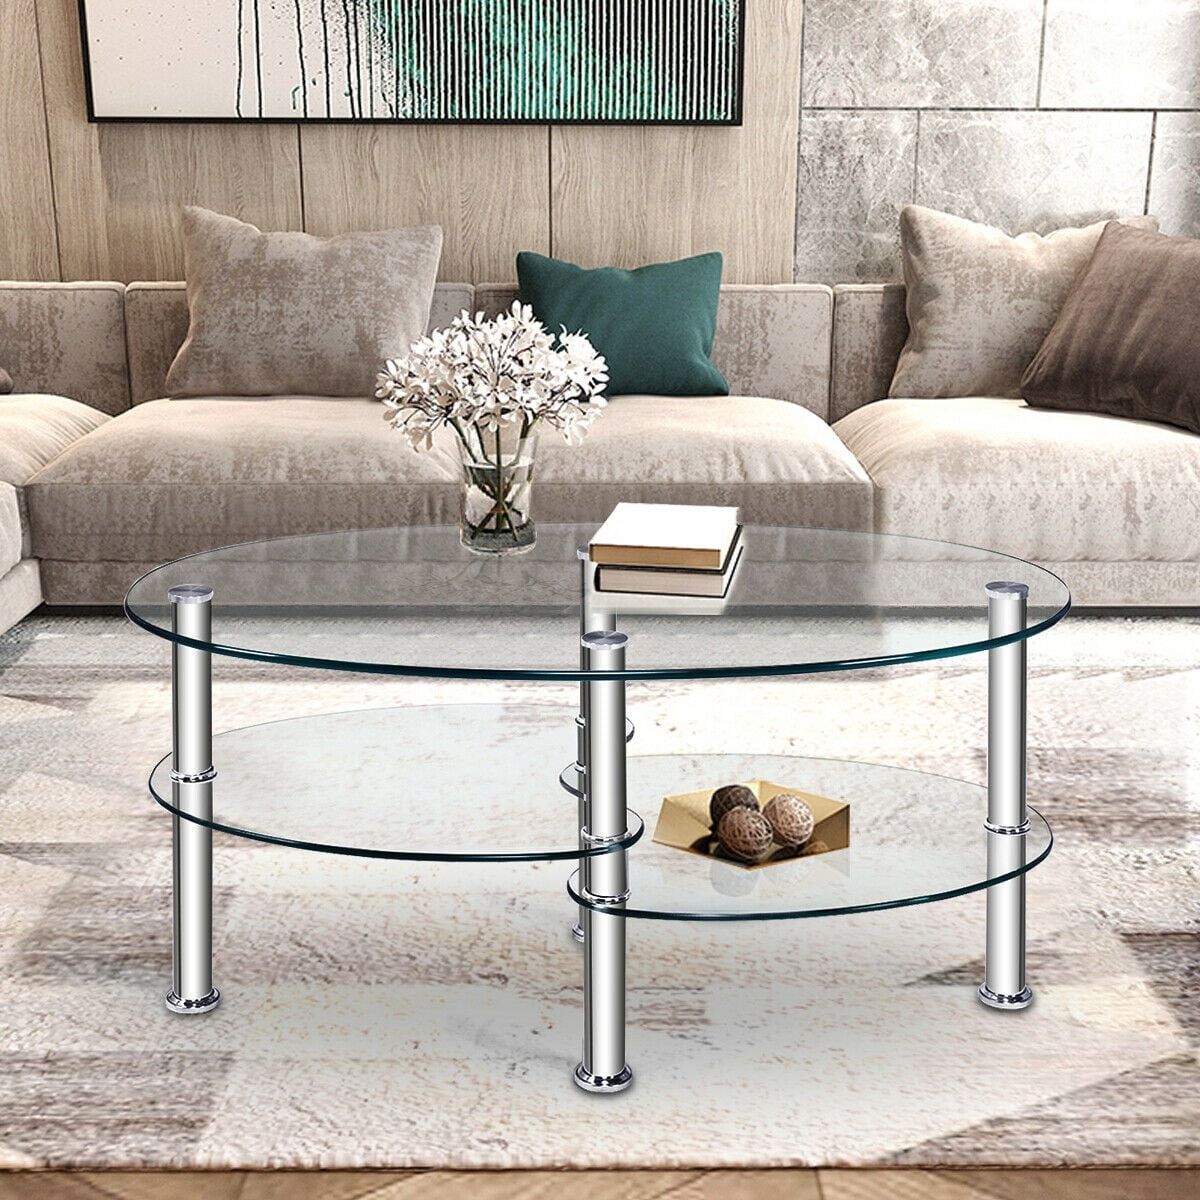 Costway Tempered Glass Oval Side Coffee Table Shelf Chrome Base Living Regarding Oval Glass Coffee Tables (View 17 of 20)